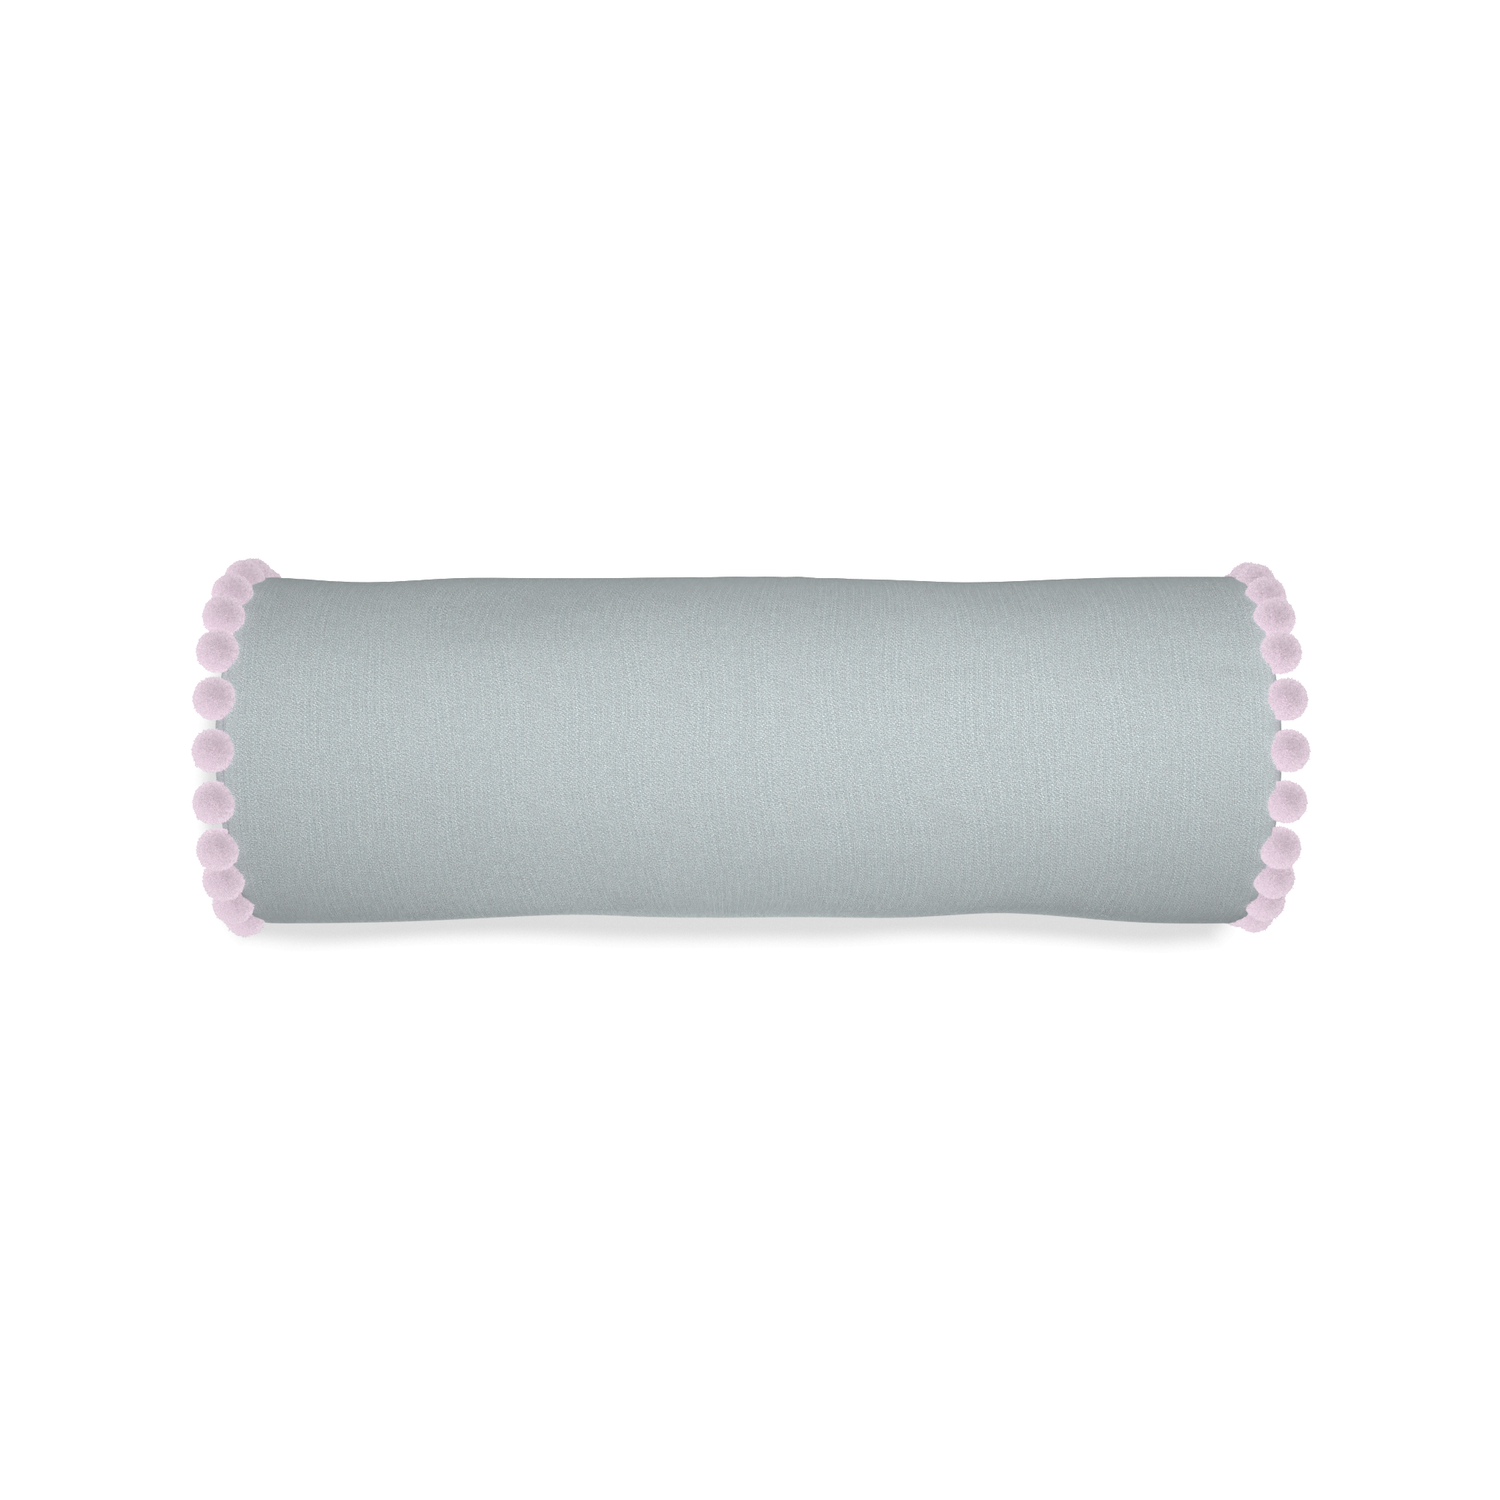 Bolster sea custom grey bluepillow with l on white background